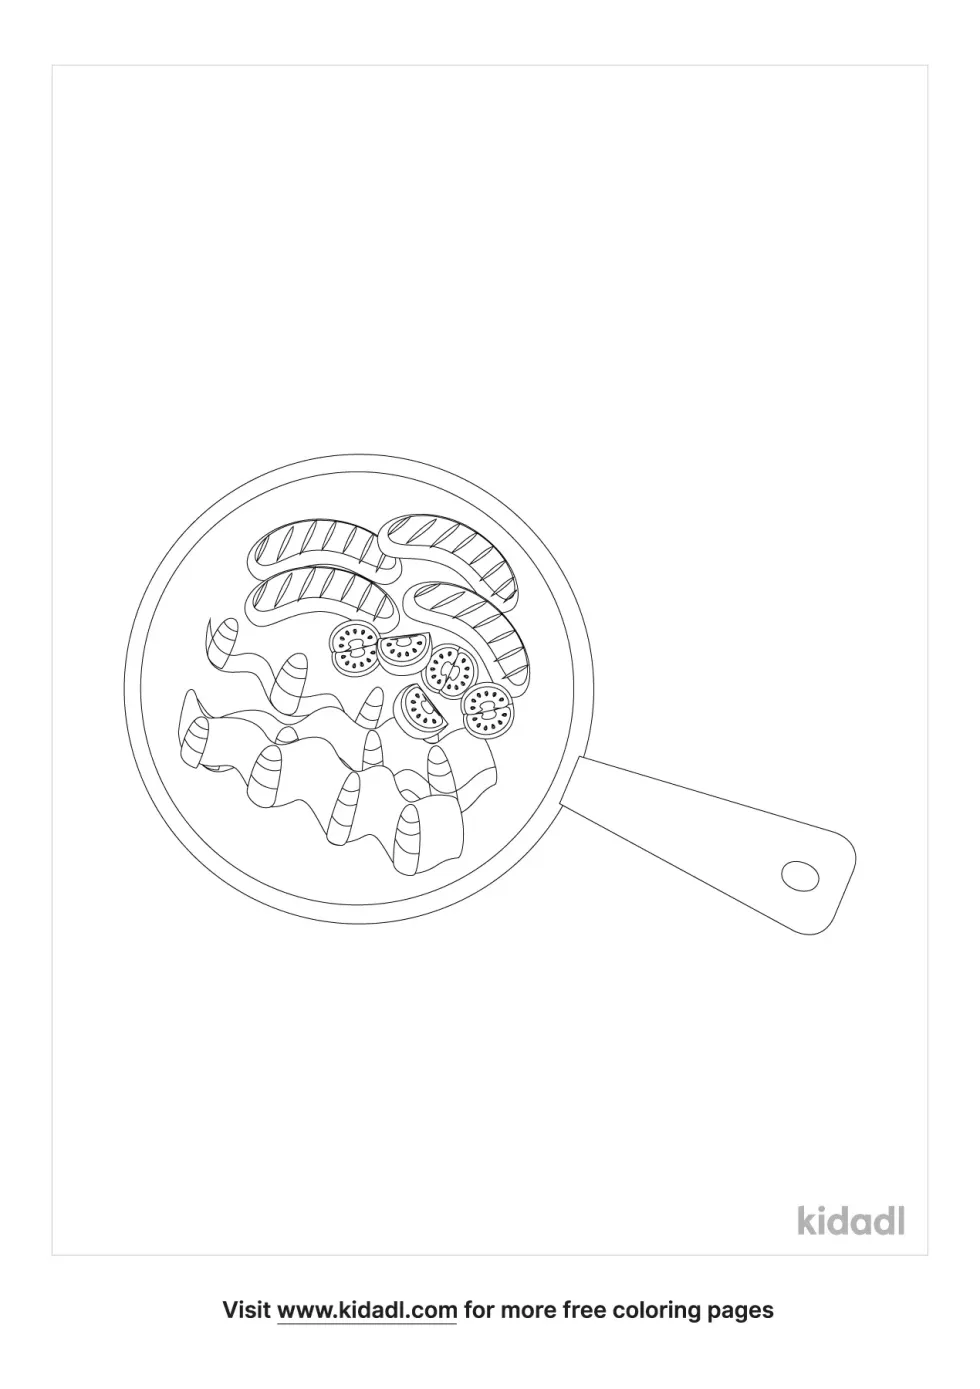 Sausage In A Skillet Coloring Page